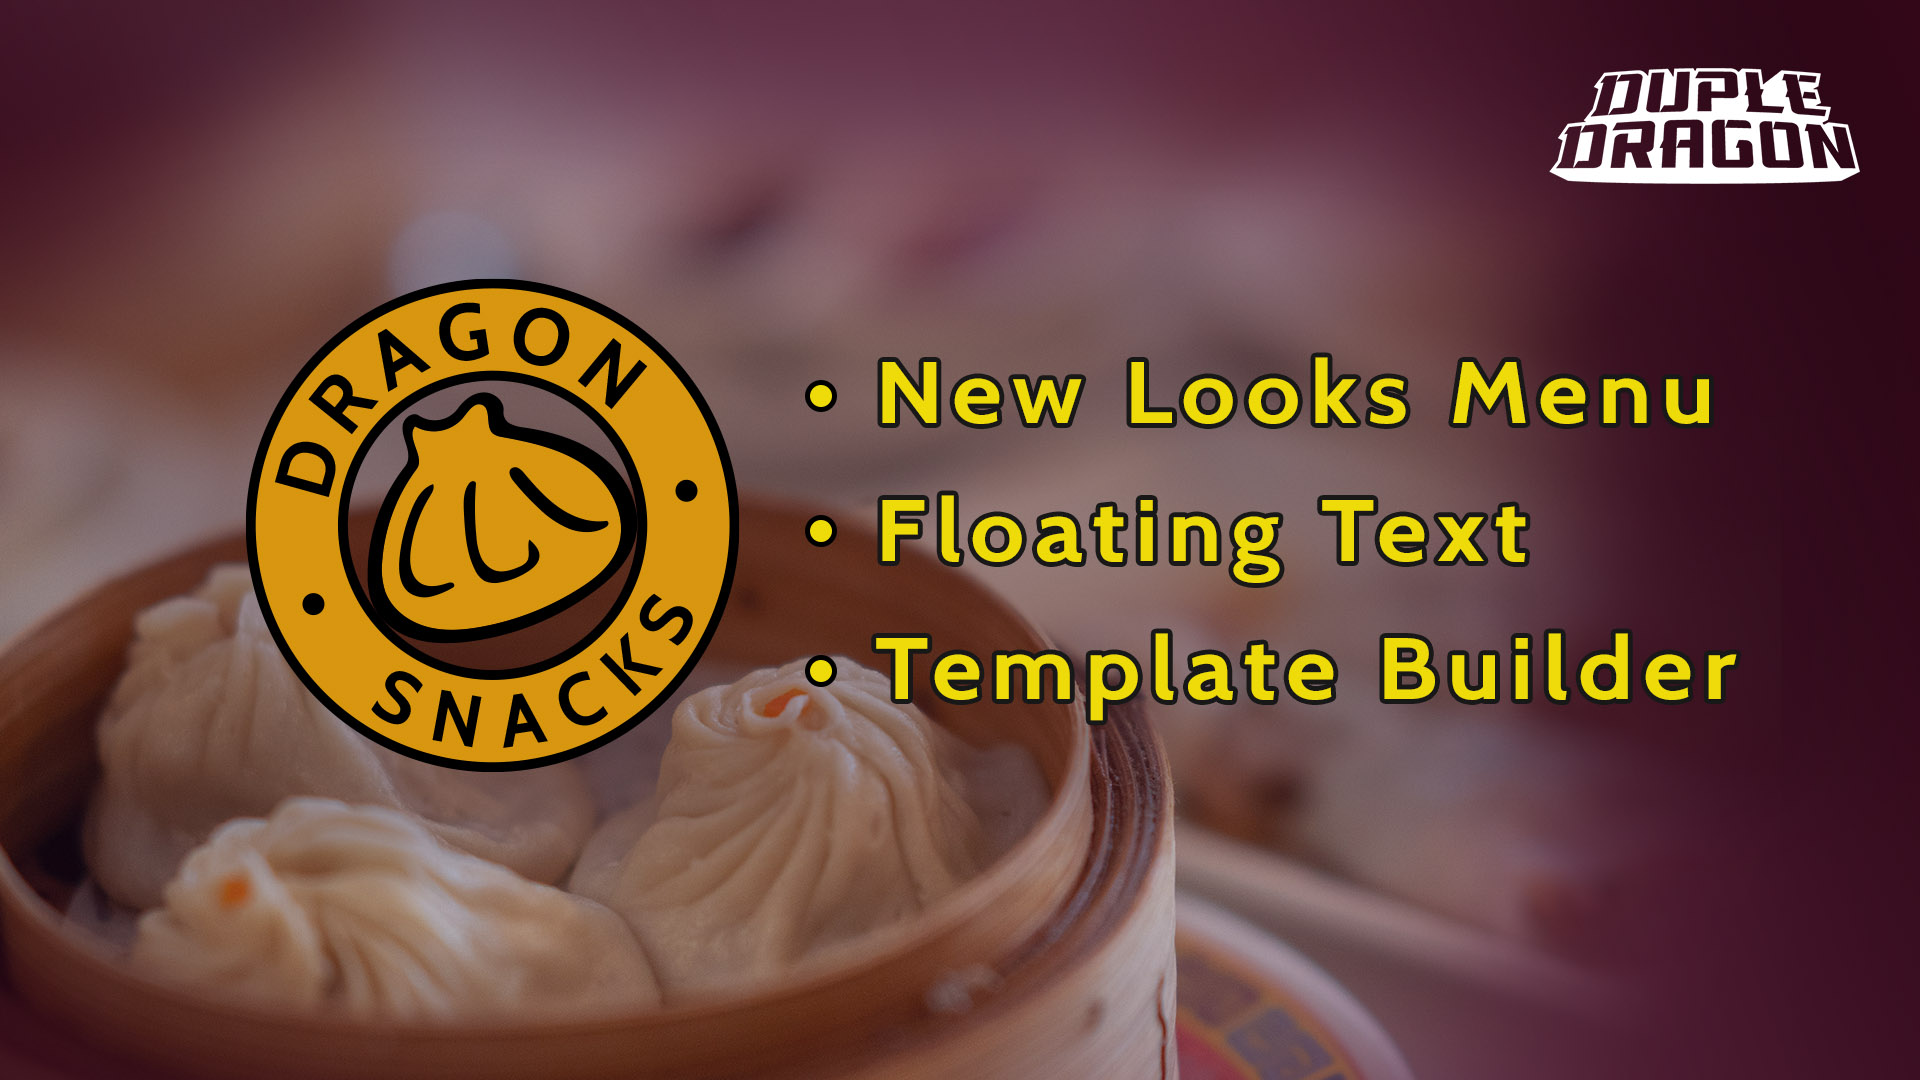 Dragon Snacks: New Looks Menu, Floating Text, and Template Builder